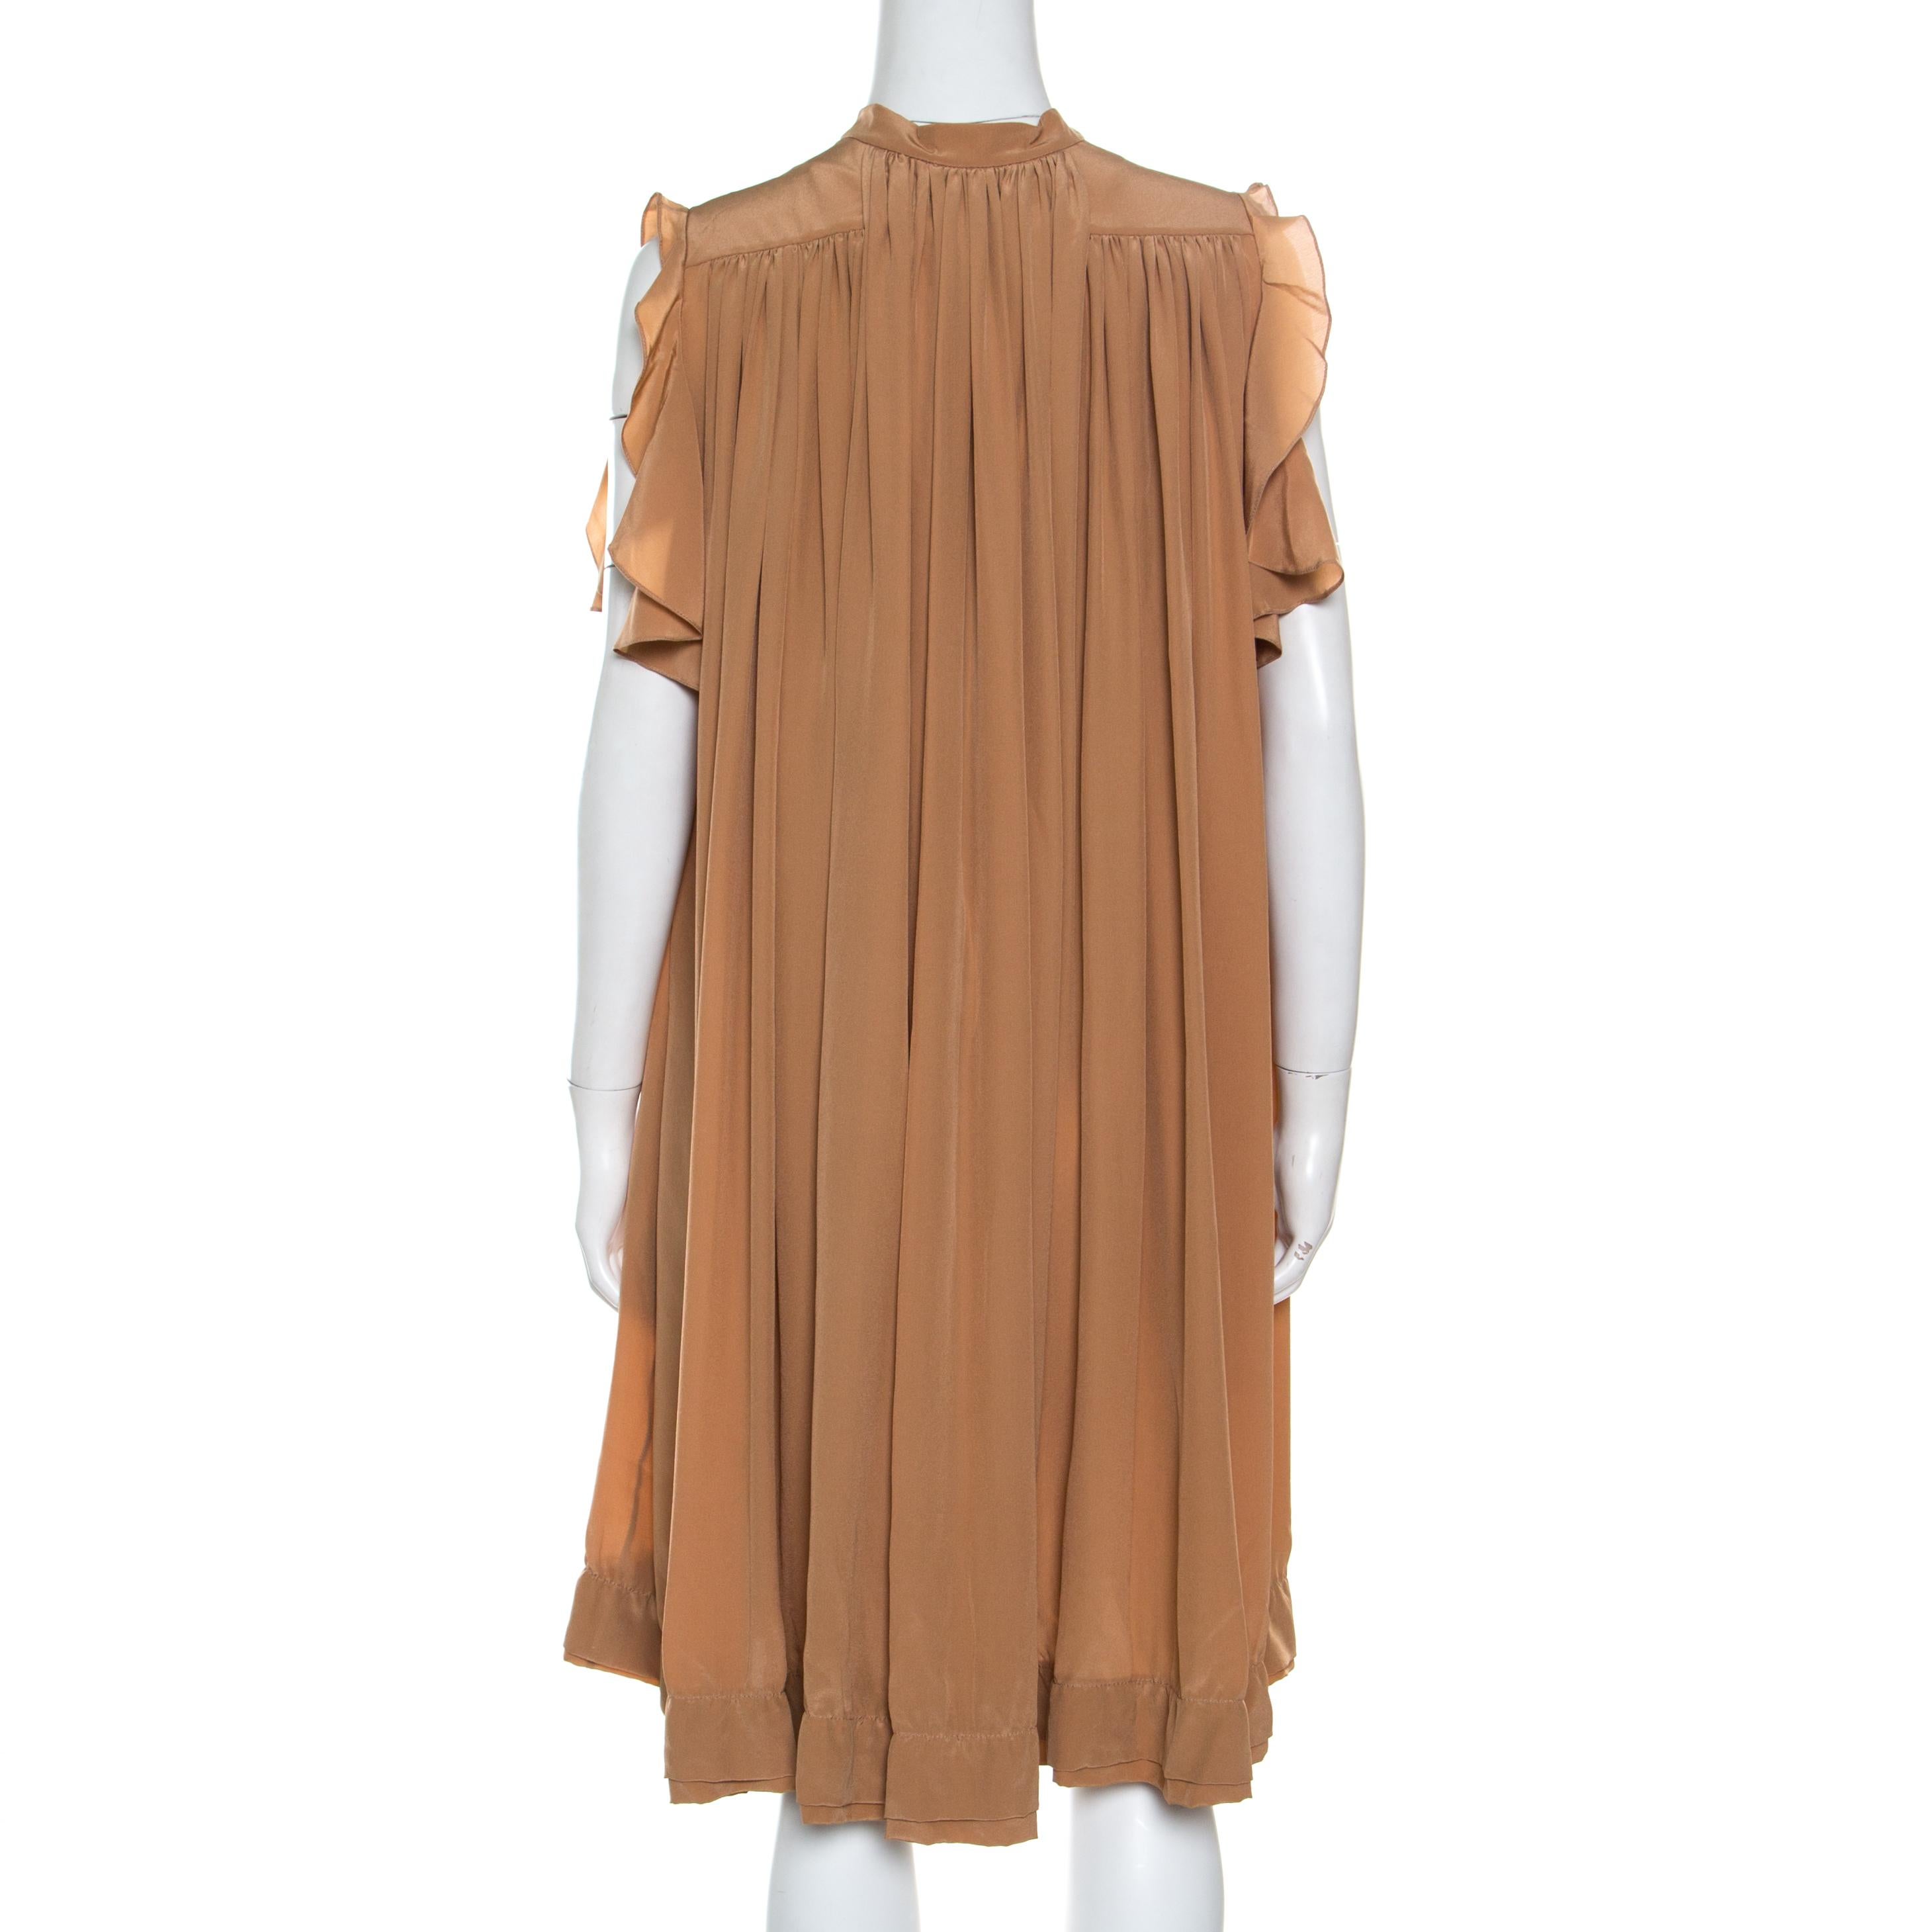 This modernistic dress from the house of Chloe features a pretty design making it a must-have piece in your closet. Arrive in great style dressed in this charming brown dress. Crafted with smooth silk fabric this dress puts you in the limelight. It